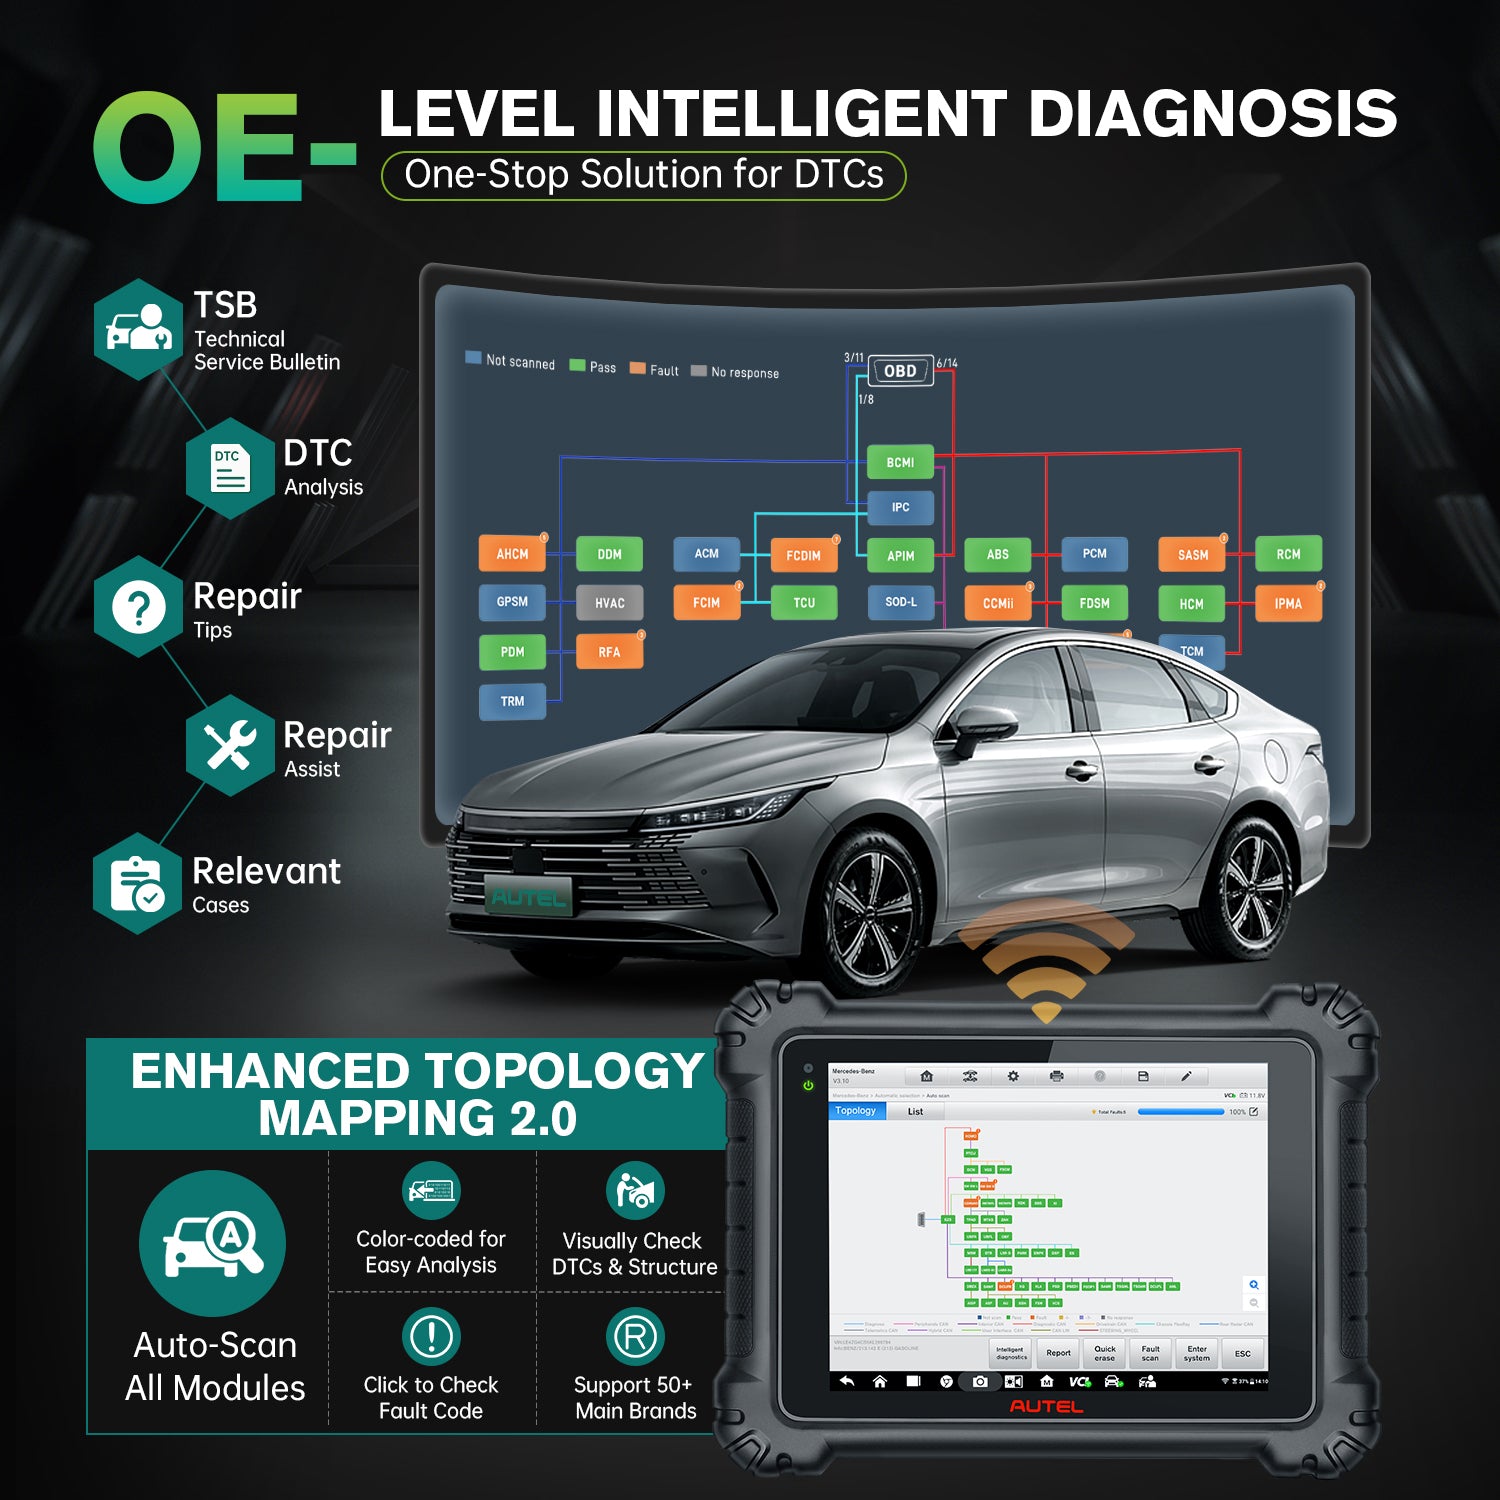 Powerful Intelligent Diagnostics and Topology Mapping 2.0